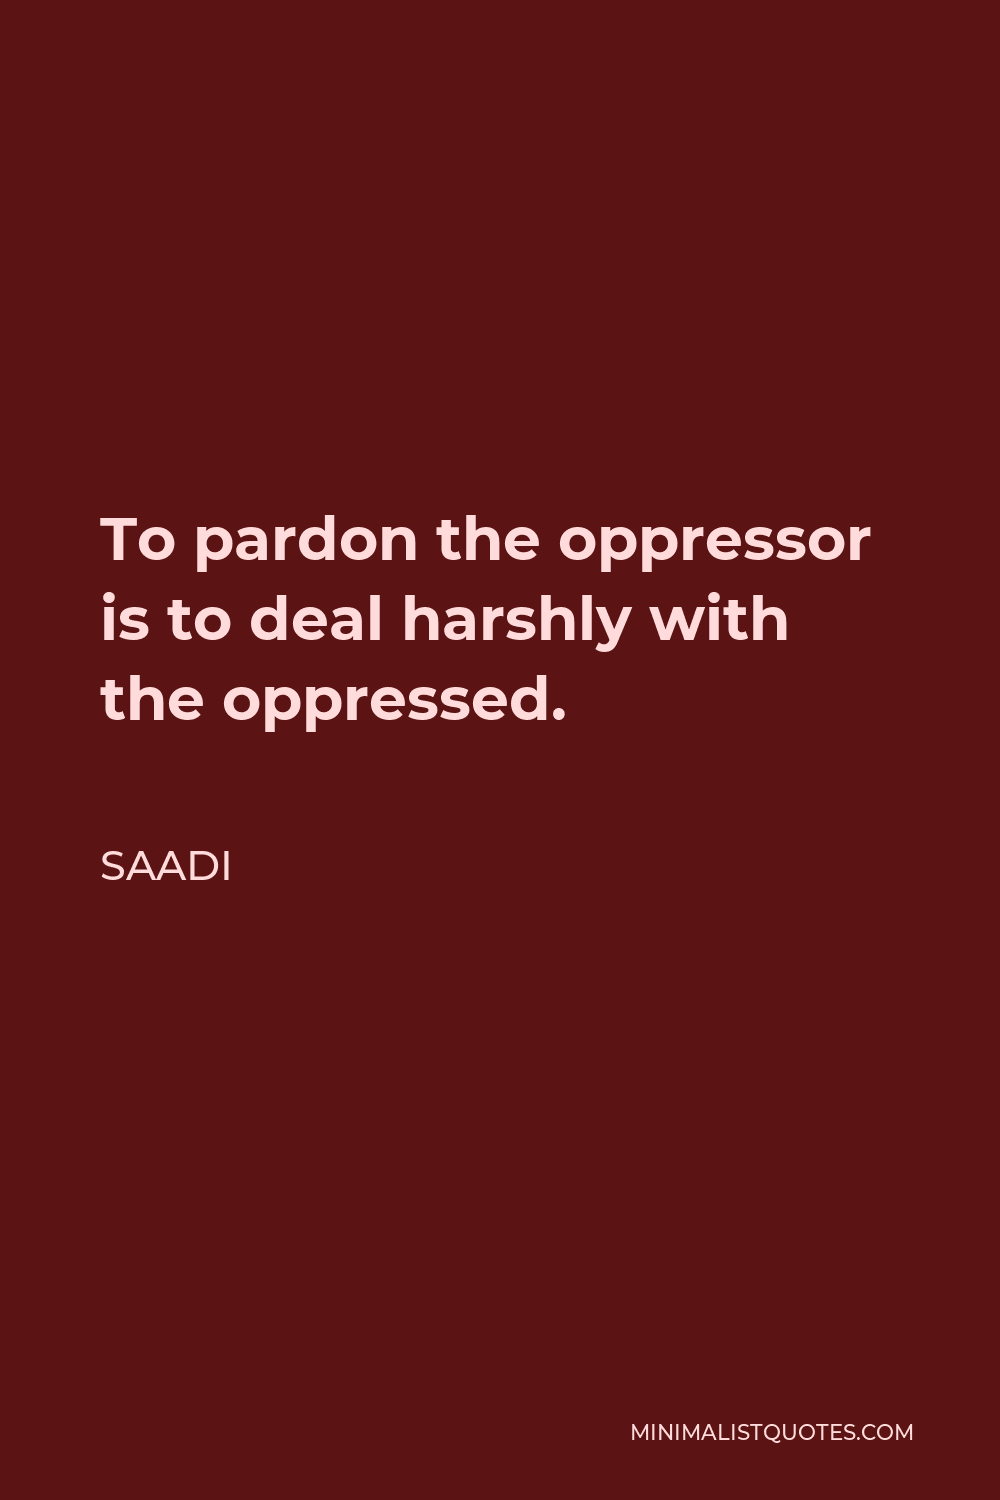 Saadi Quote - To pardon the oppressor is to deal harshly with the oppressed.